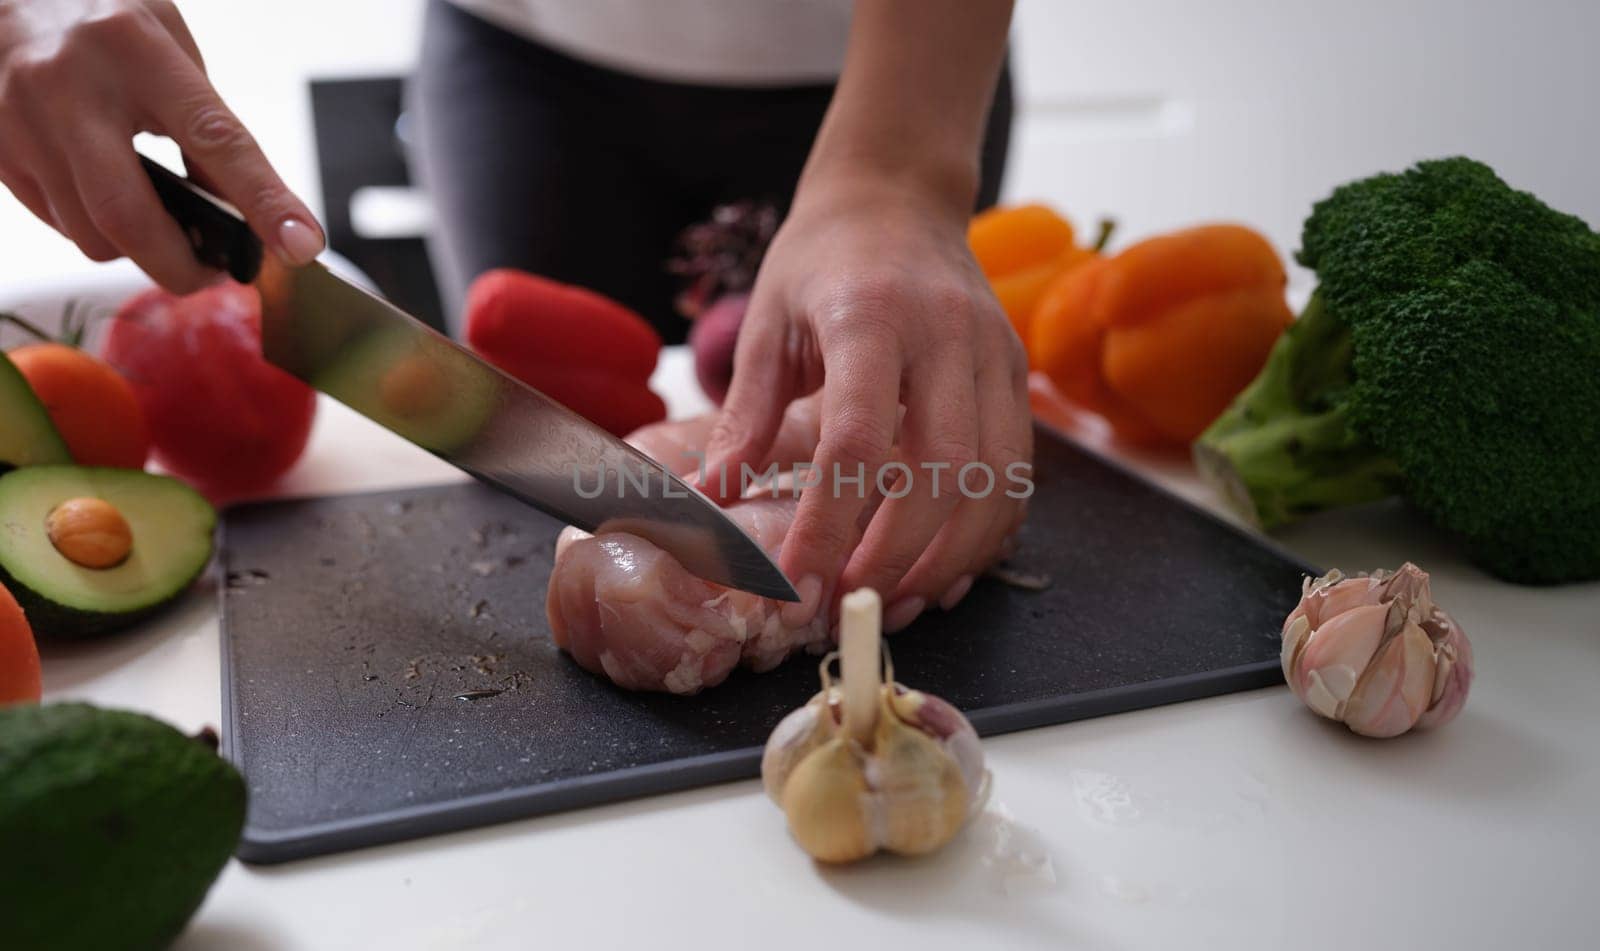 Chef cutting meat on board near vegetables closeup. Healthy nutritious food concept